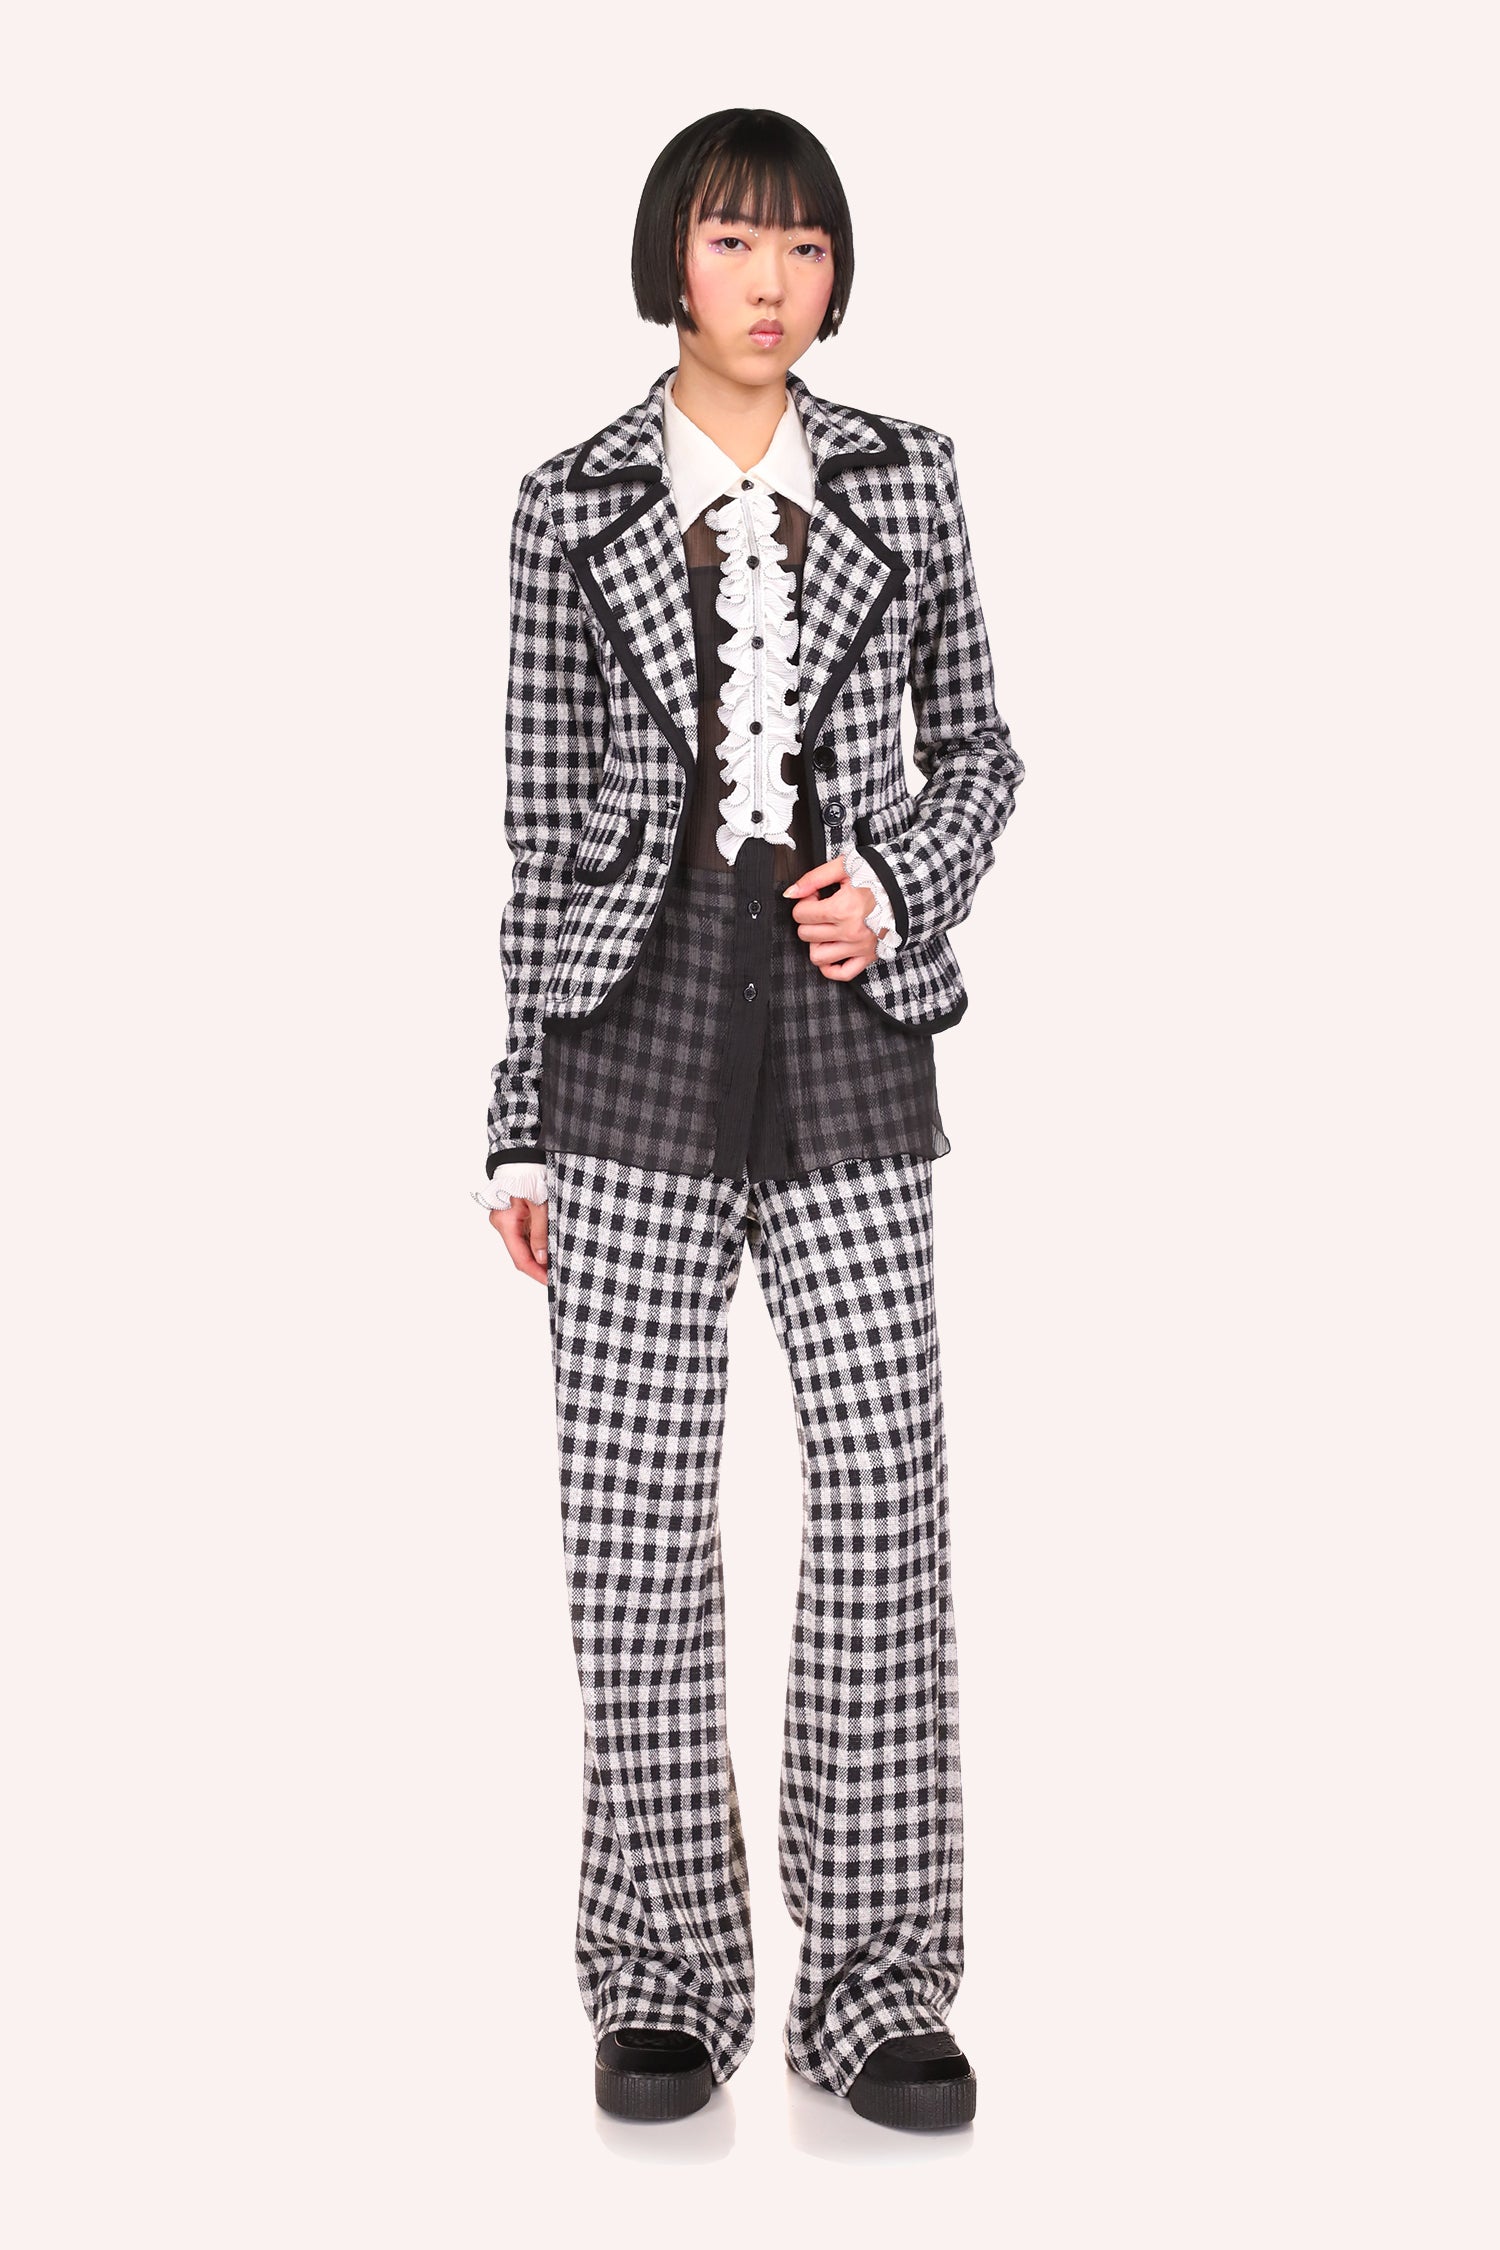 Gingham Pants Black Checkered pattern in white and black, with a zipper and belt loops